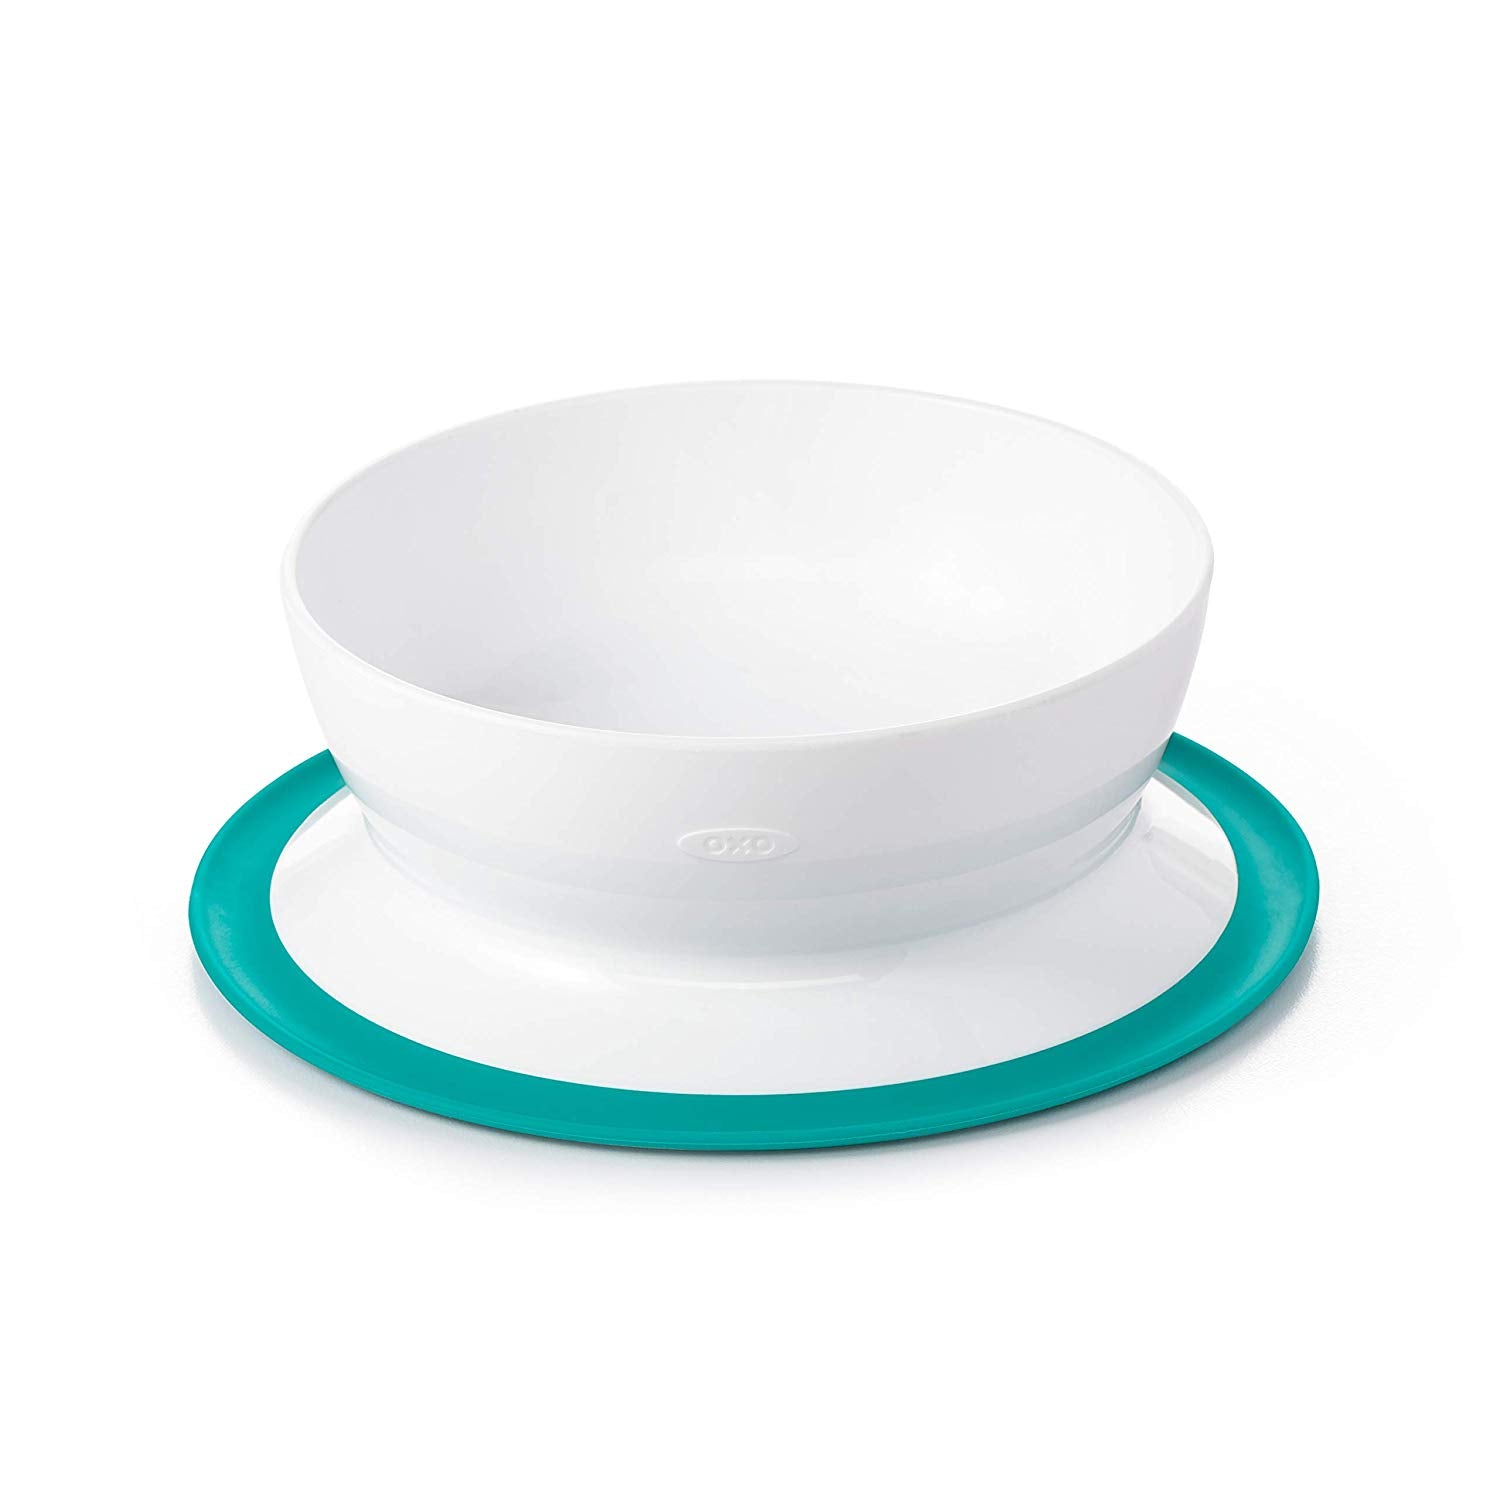 OXO TOT Stick and Stay Suction Plate, Suction Divided Plate, Suction Bowl - ANB Baby -Blue